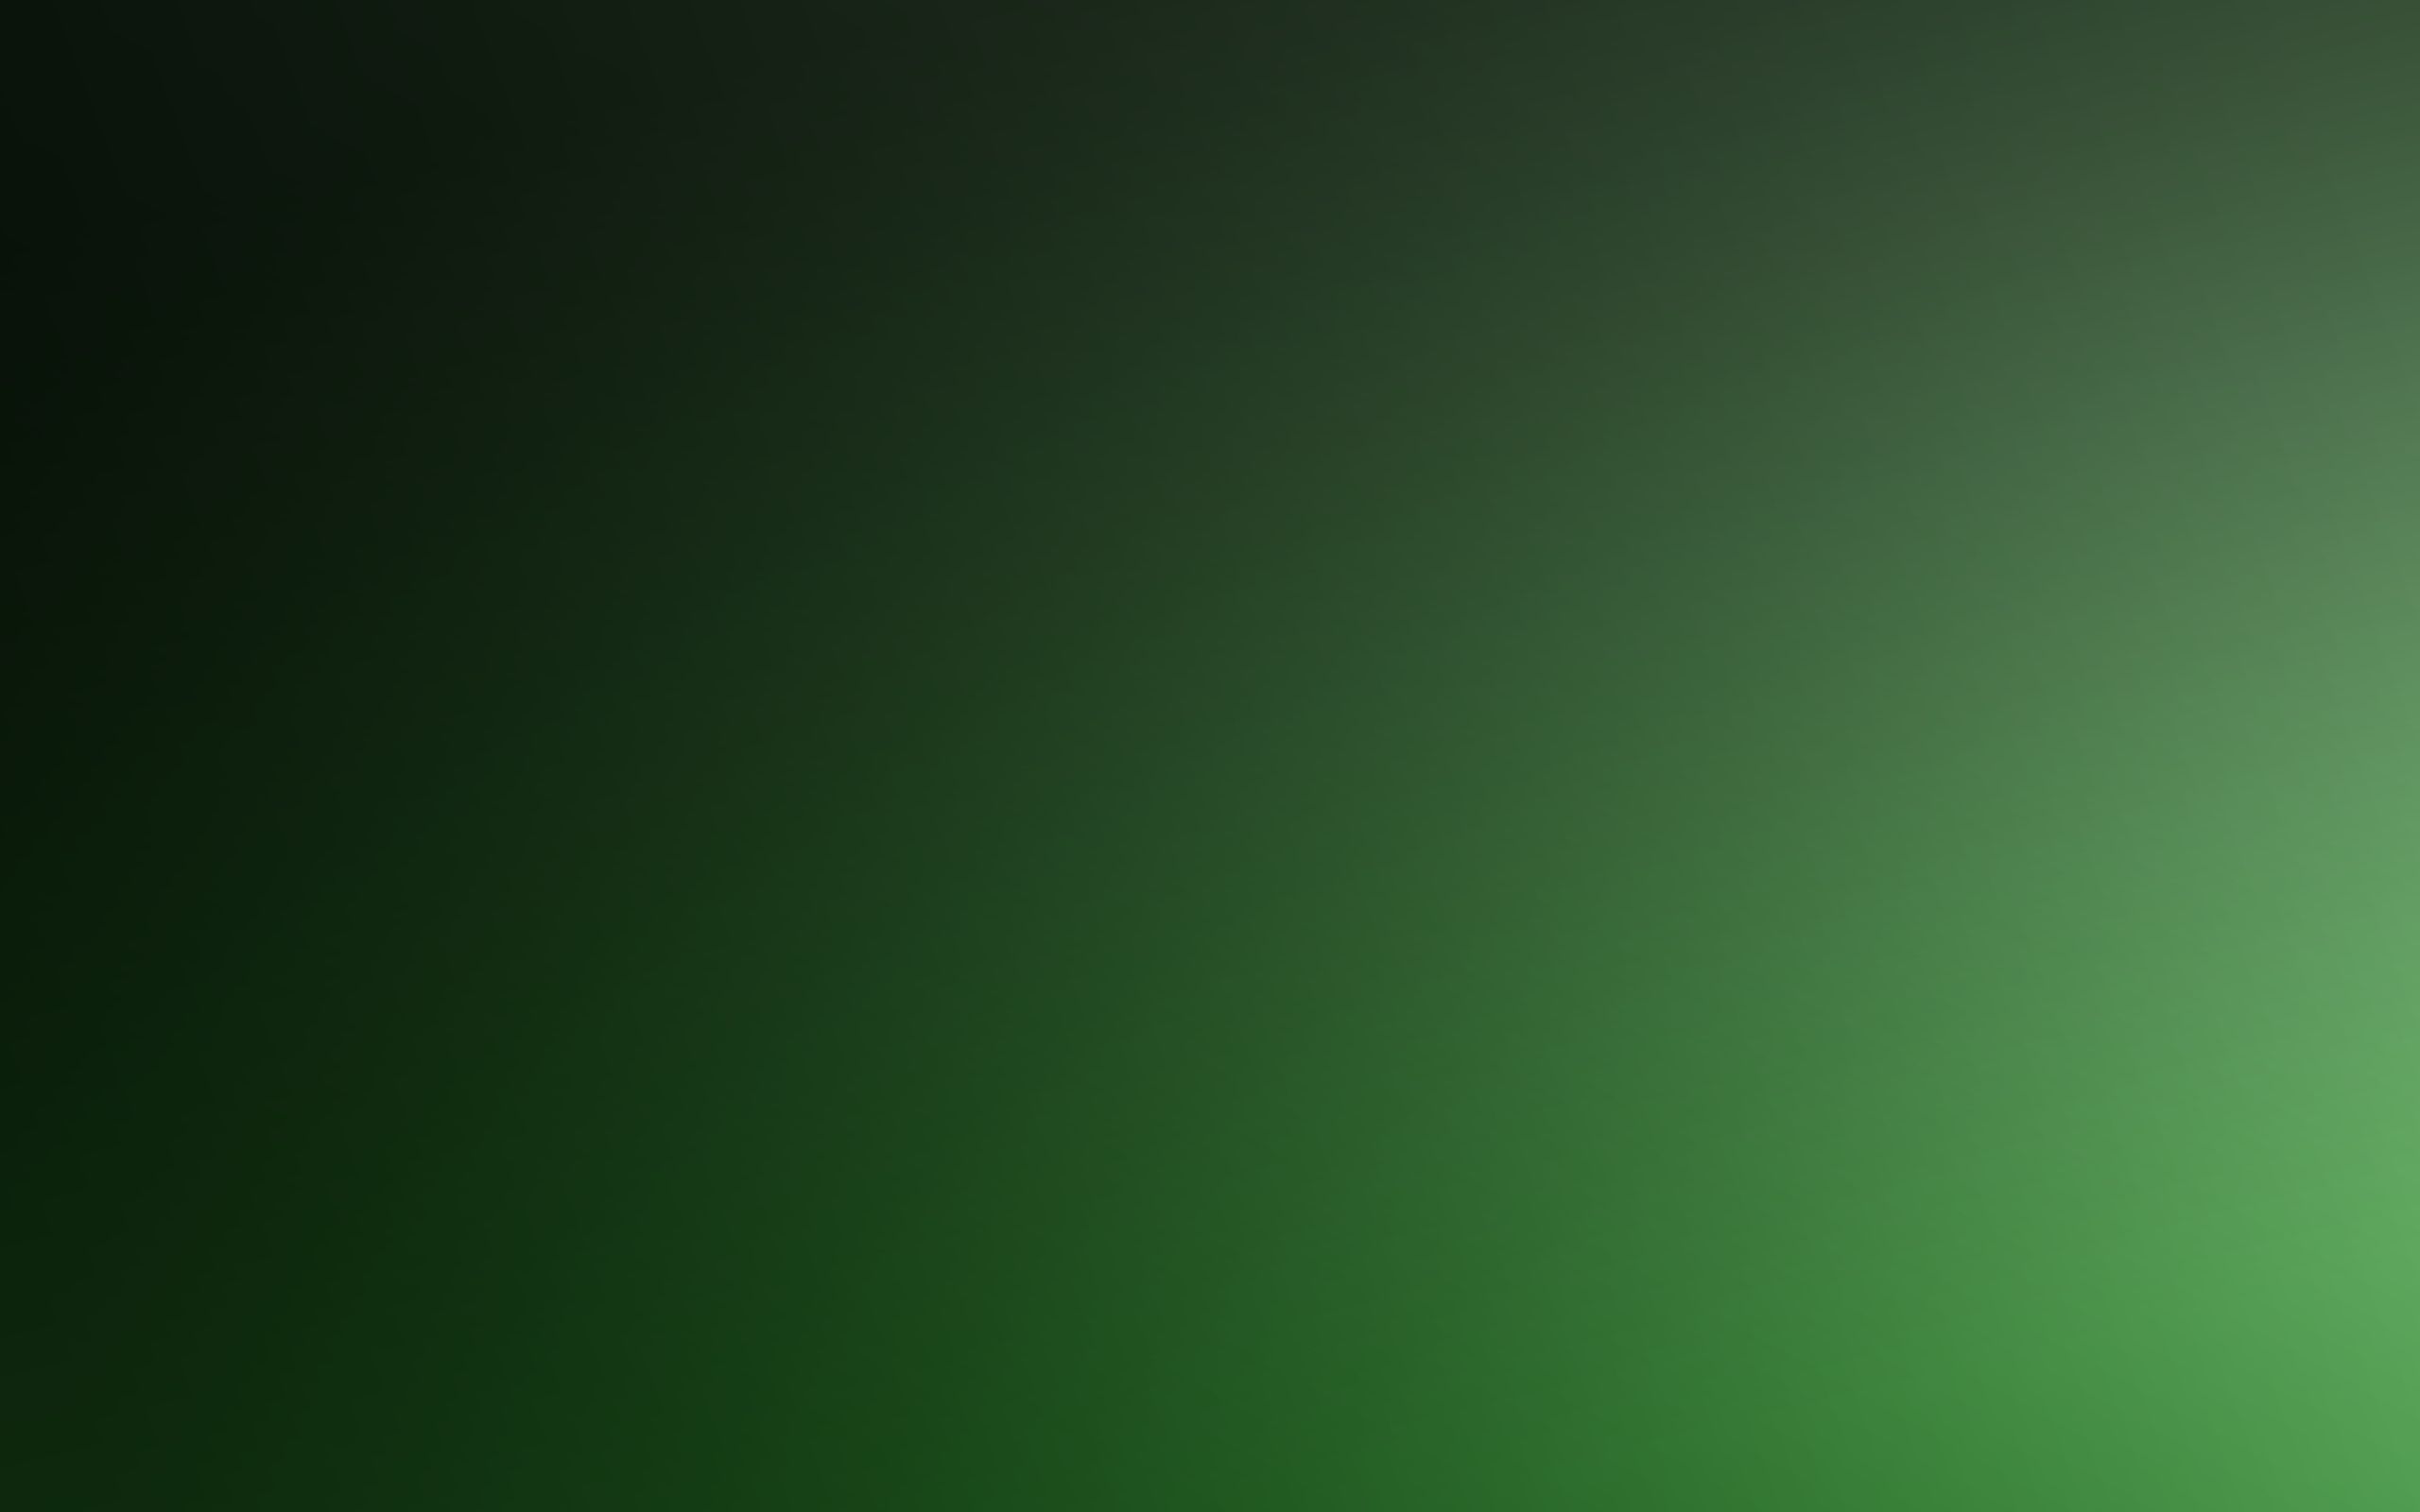 Download Wallpaper 2560x1600 Green, Background, Texture, Solid ...